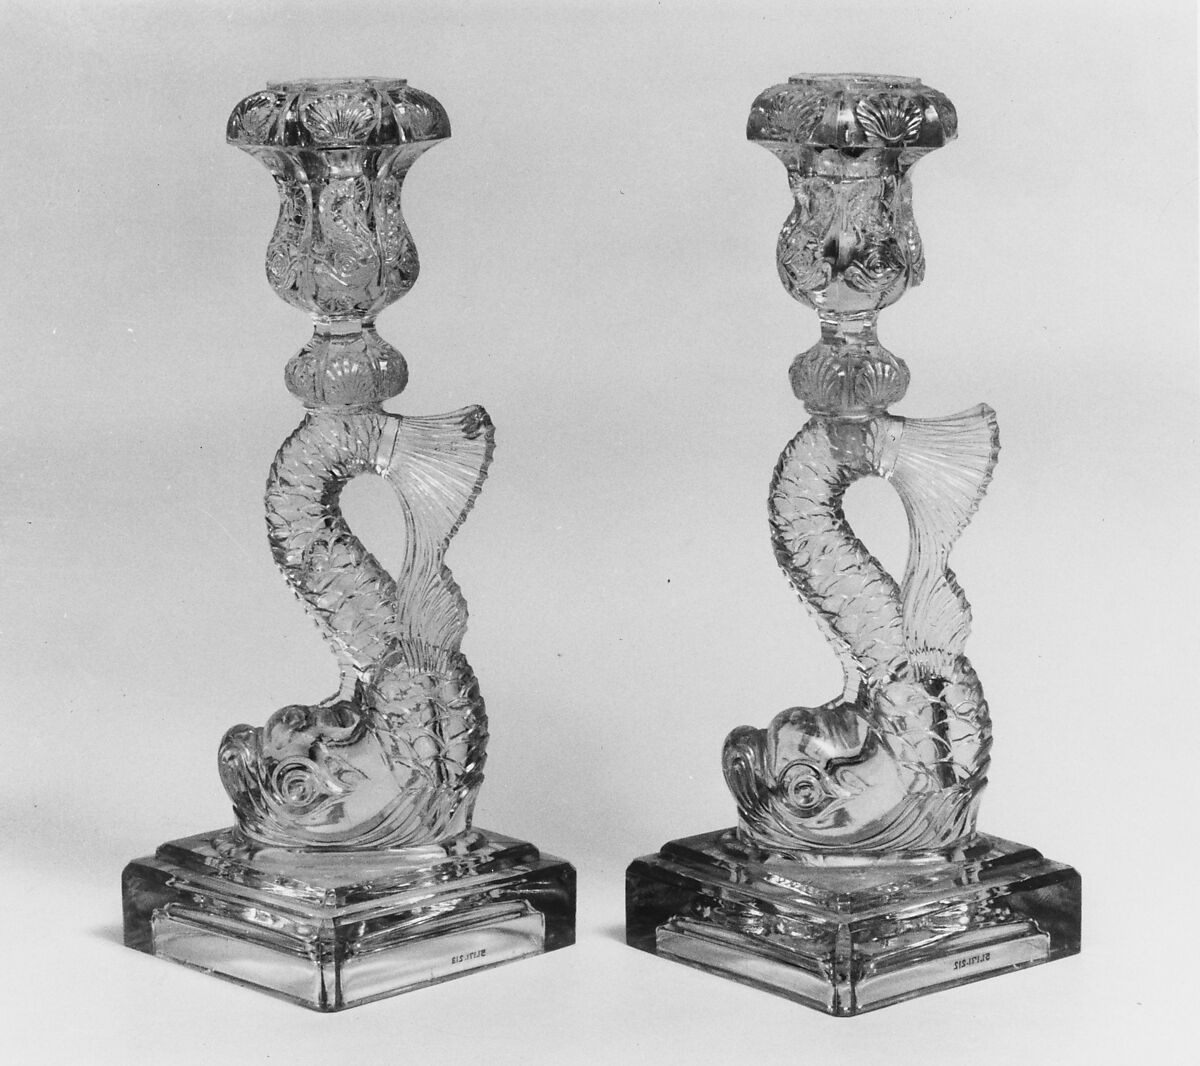 Candlestick, Pressed glass, American 